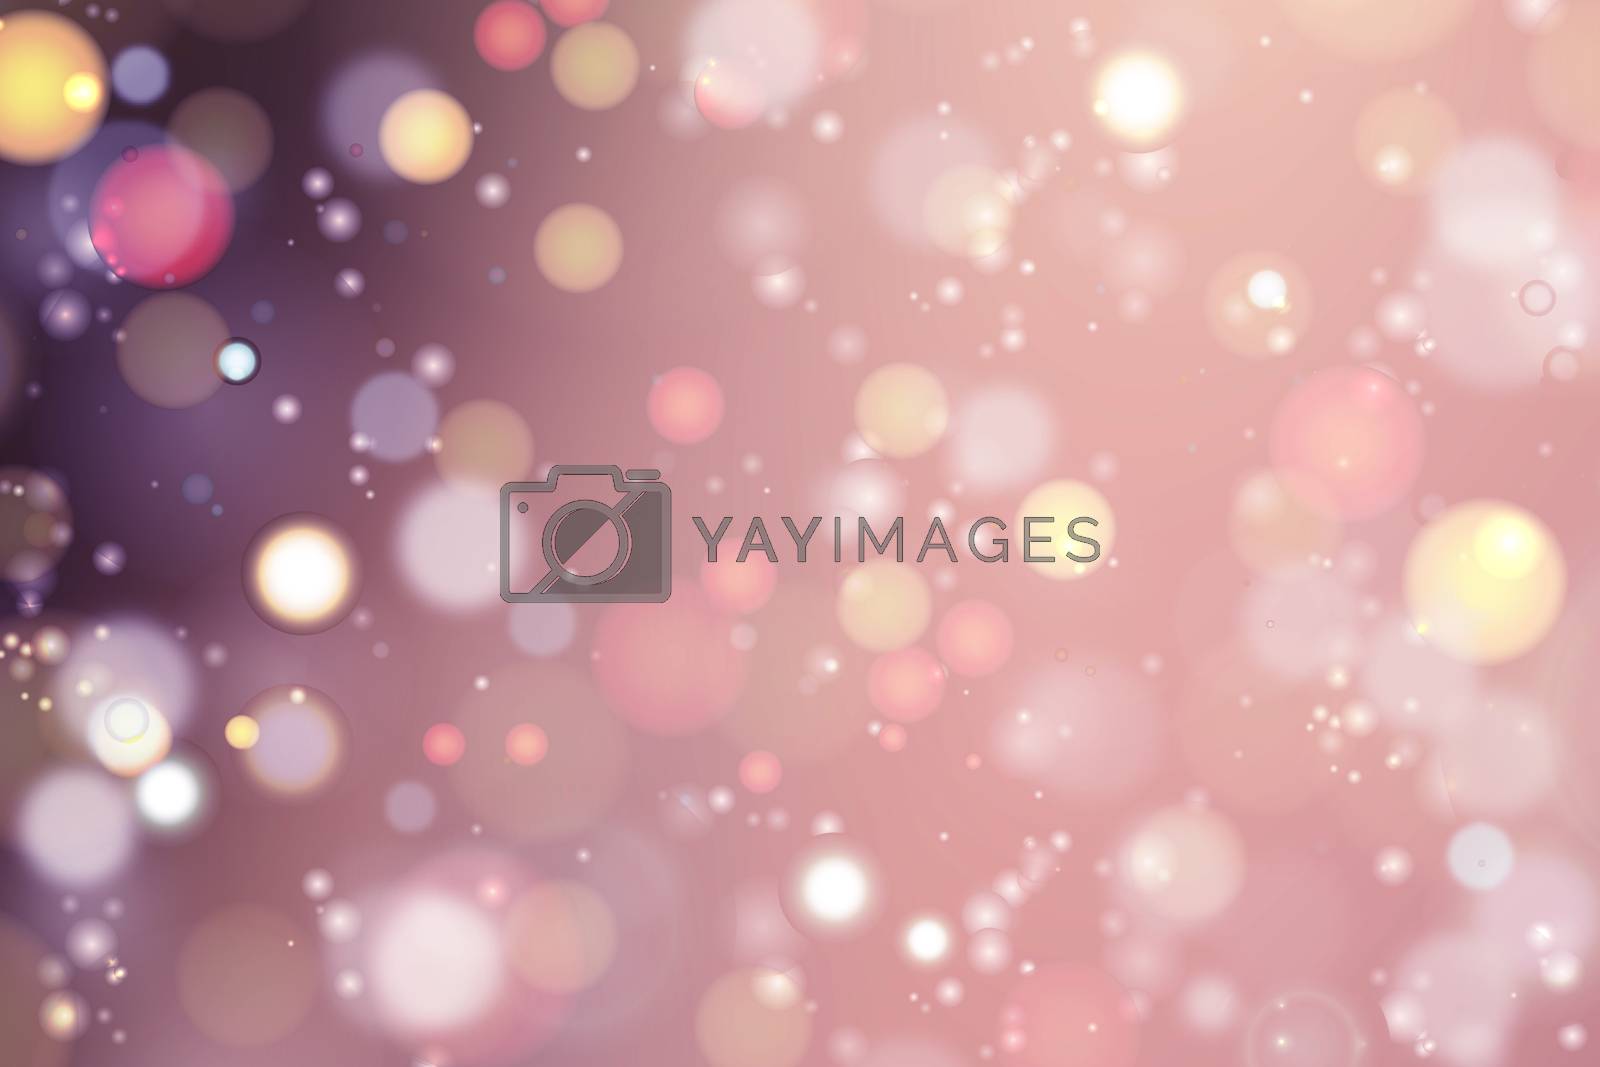 Royalty free image of Abstract light background, Beautiful bokeh made of blurred light by shaadjutt36